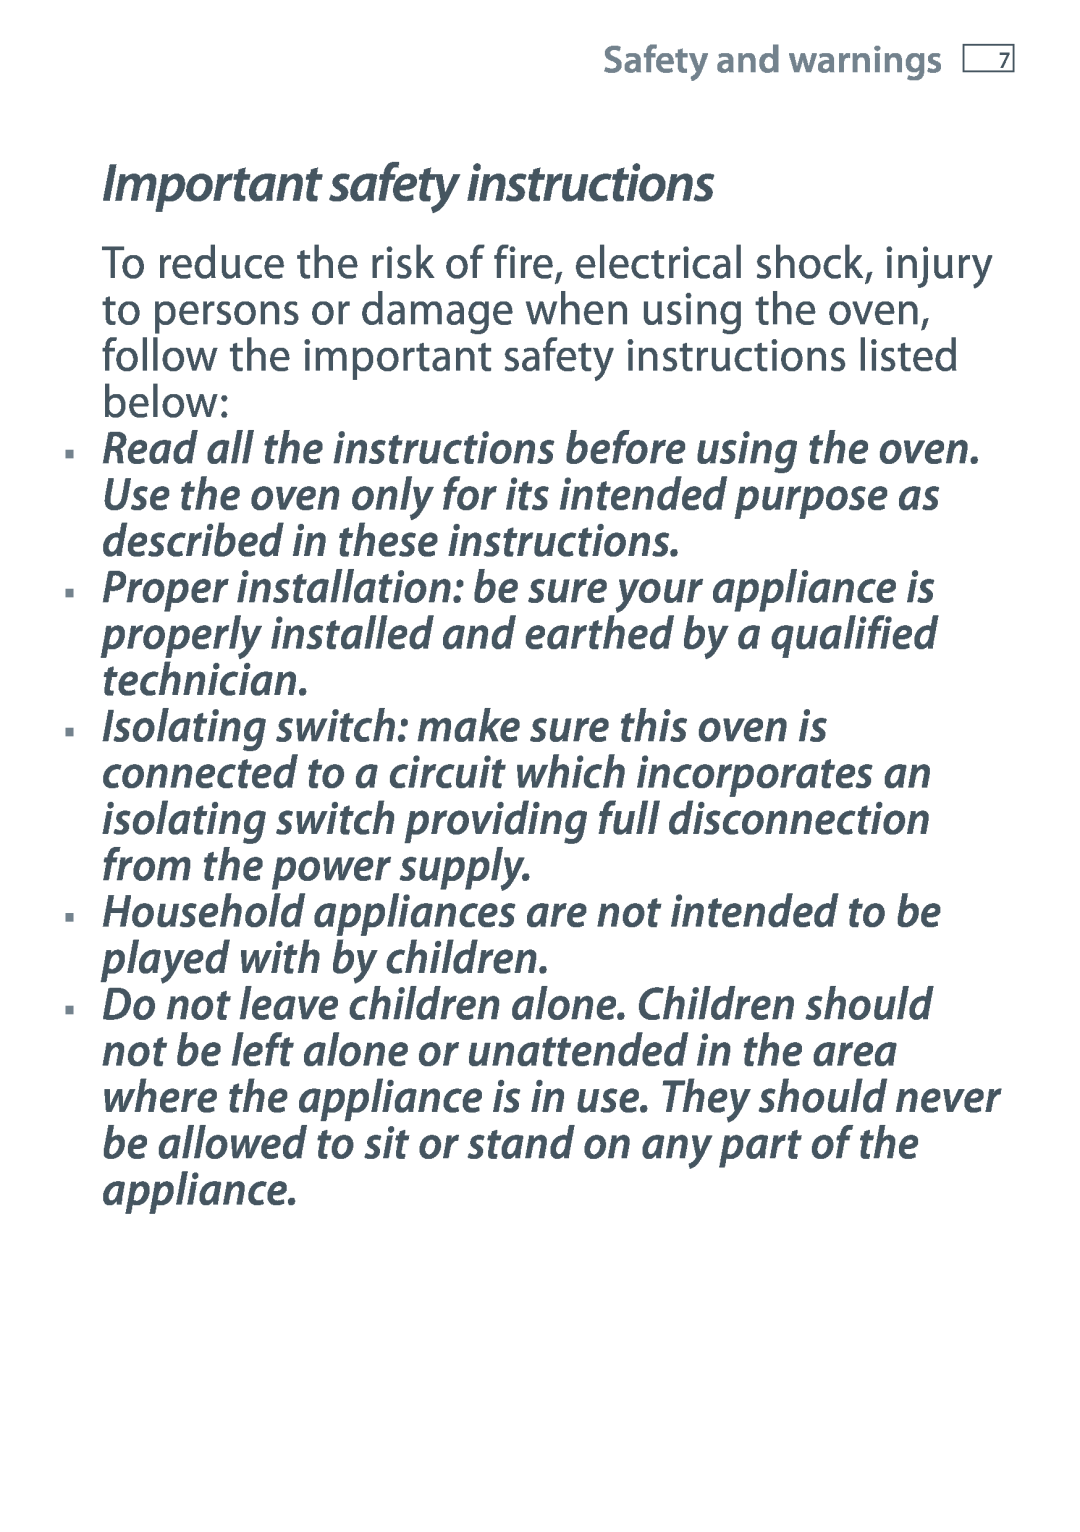 Fisher & Paykel OB60SL7 Important safety instructions, Household appliances are not intended to be played with by children 